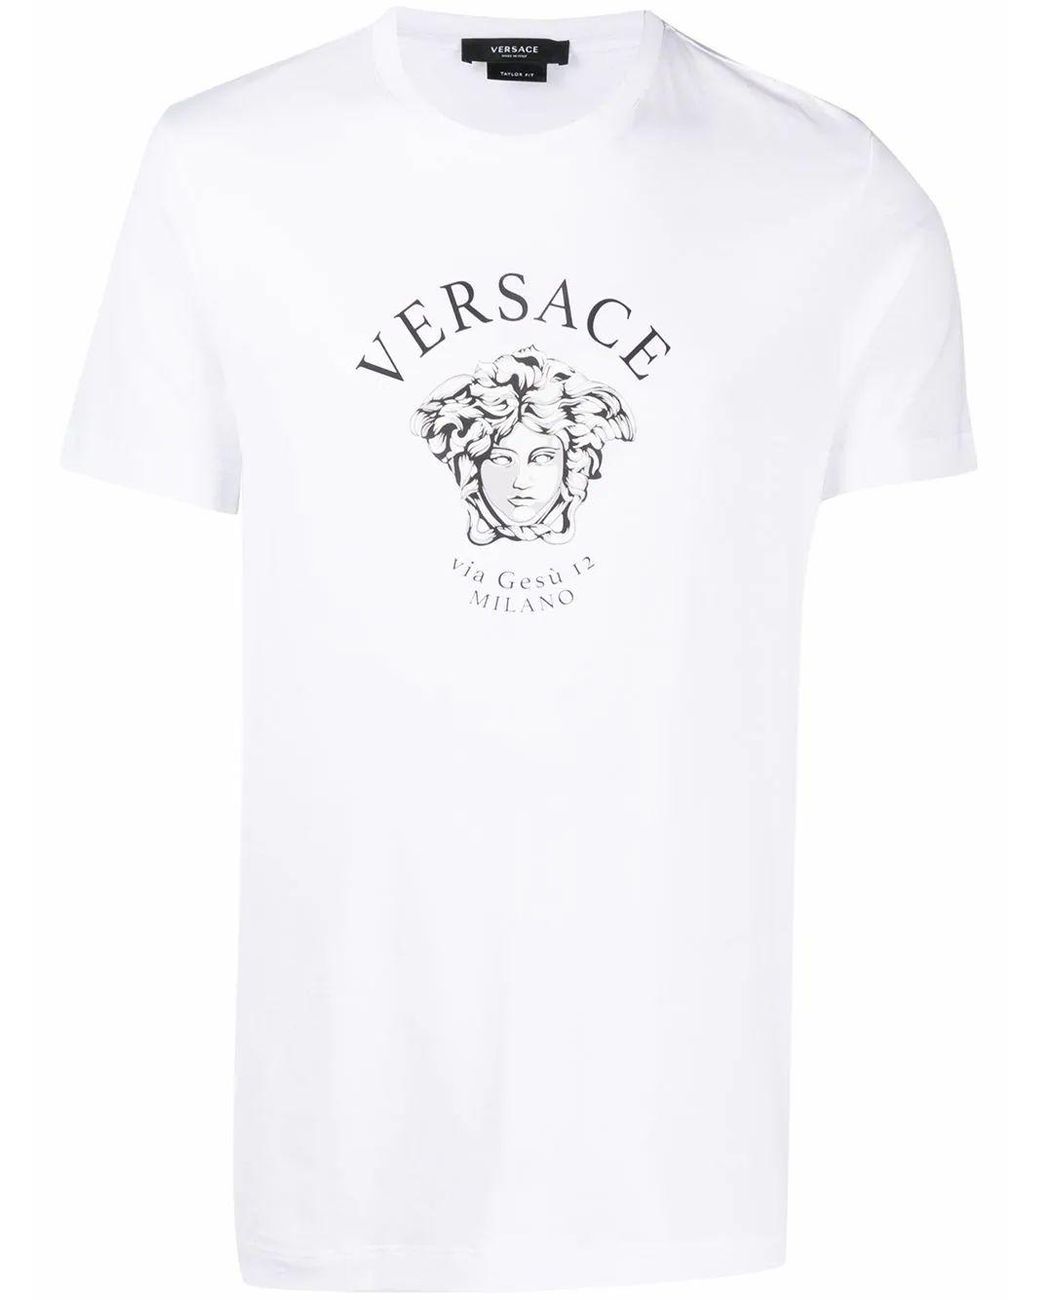 Versace Cotton T-shirt in White for Men - Lyst